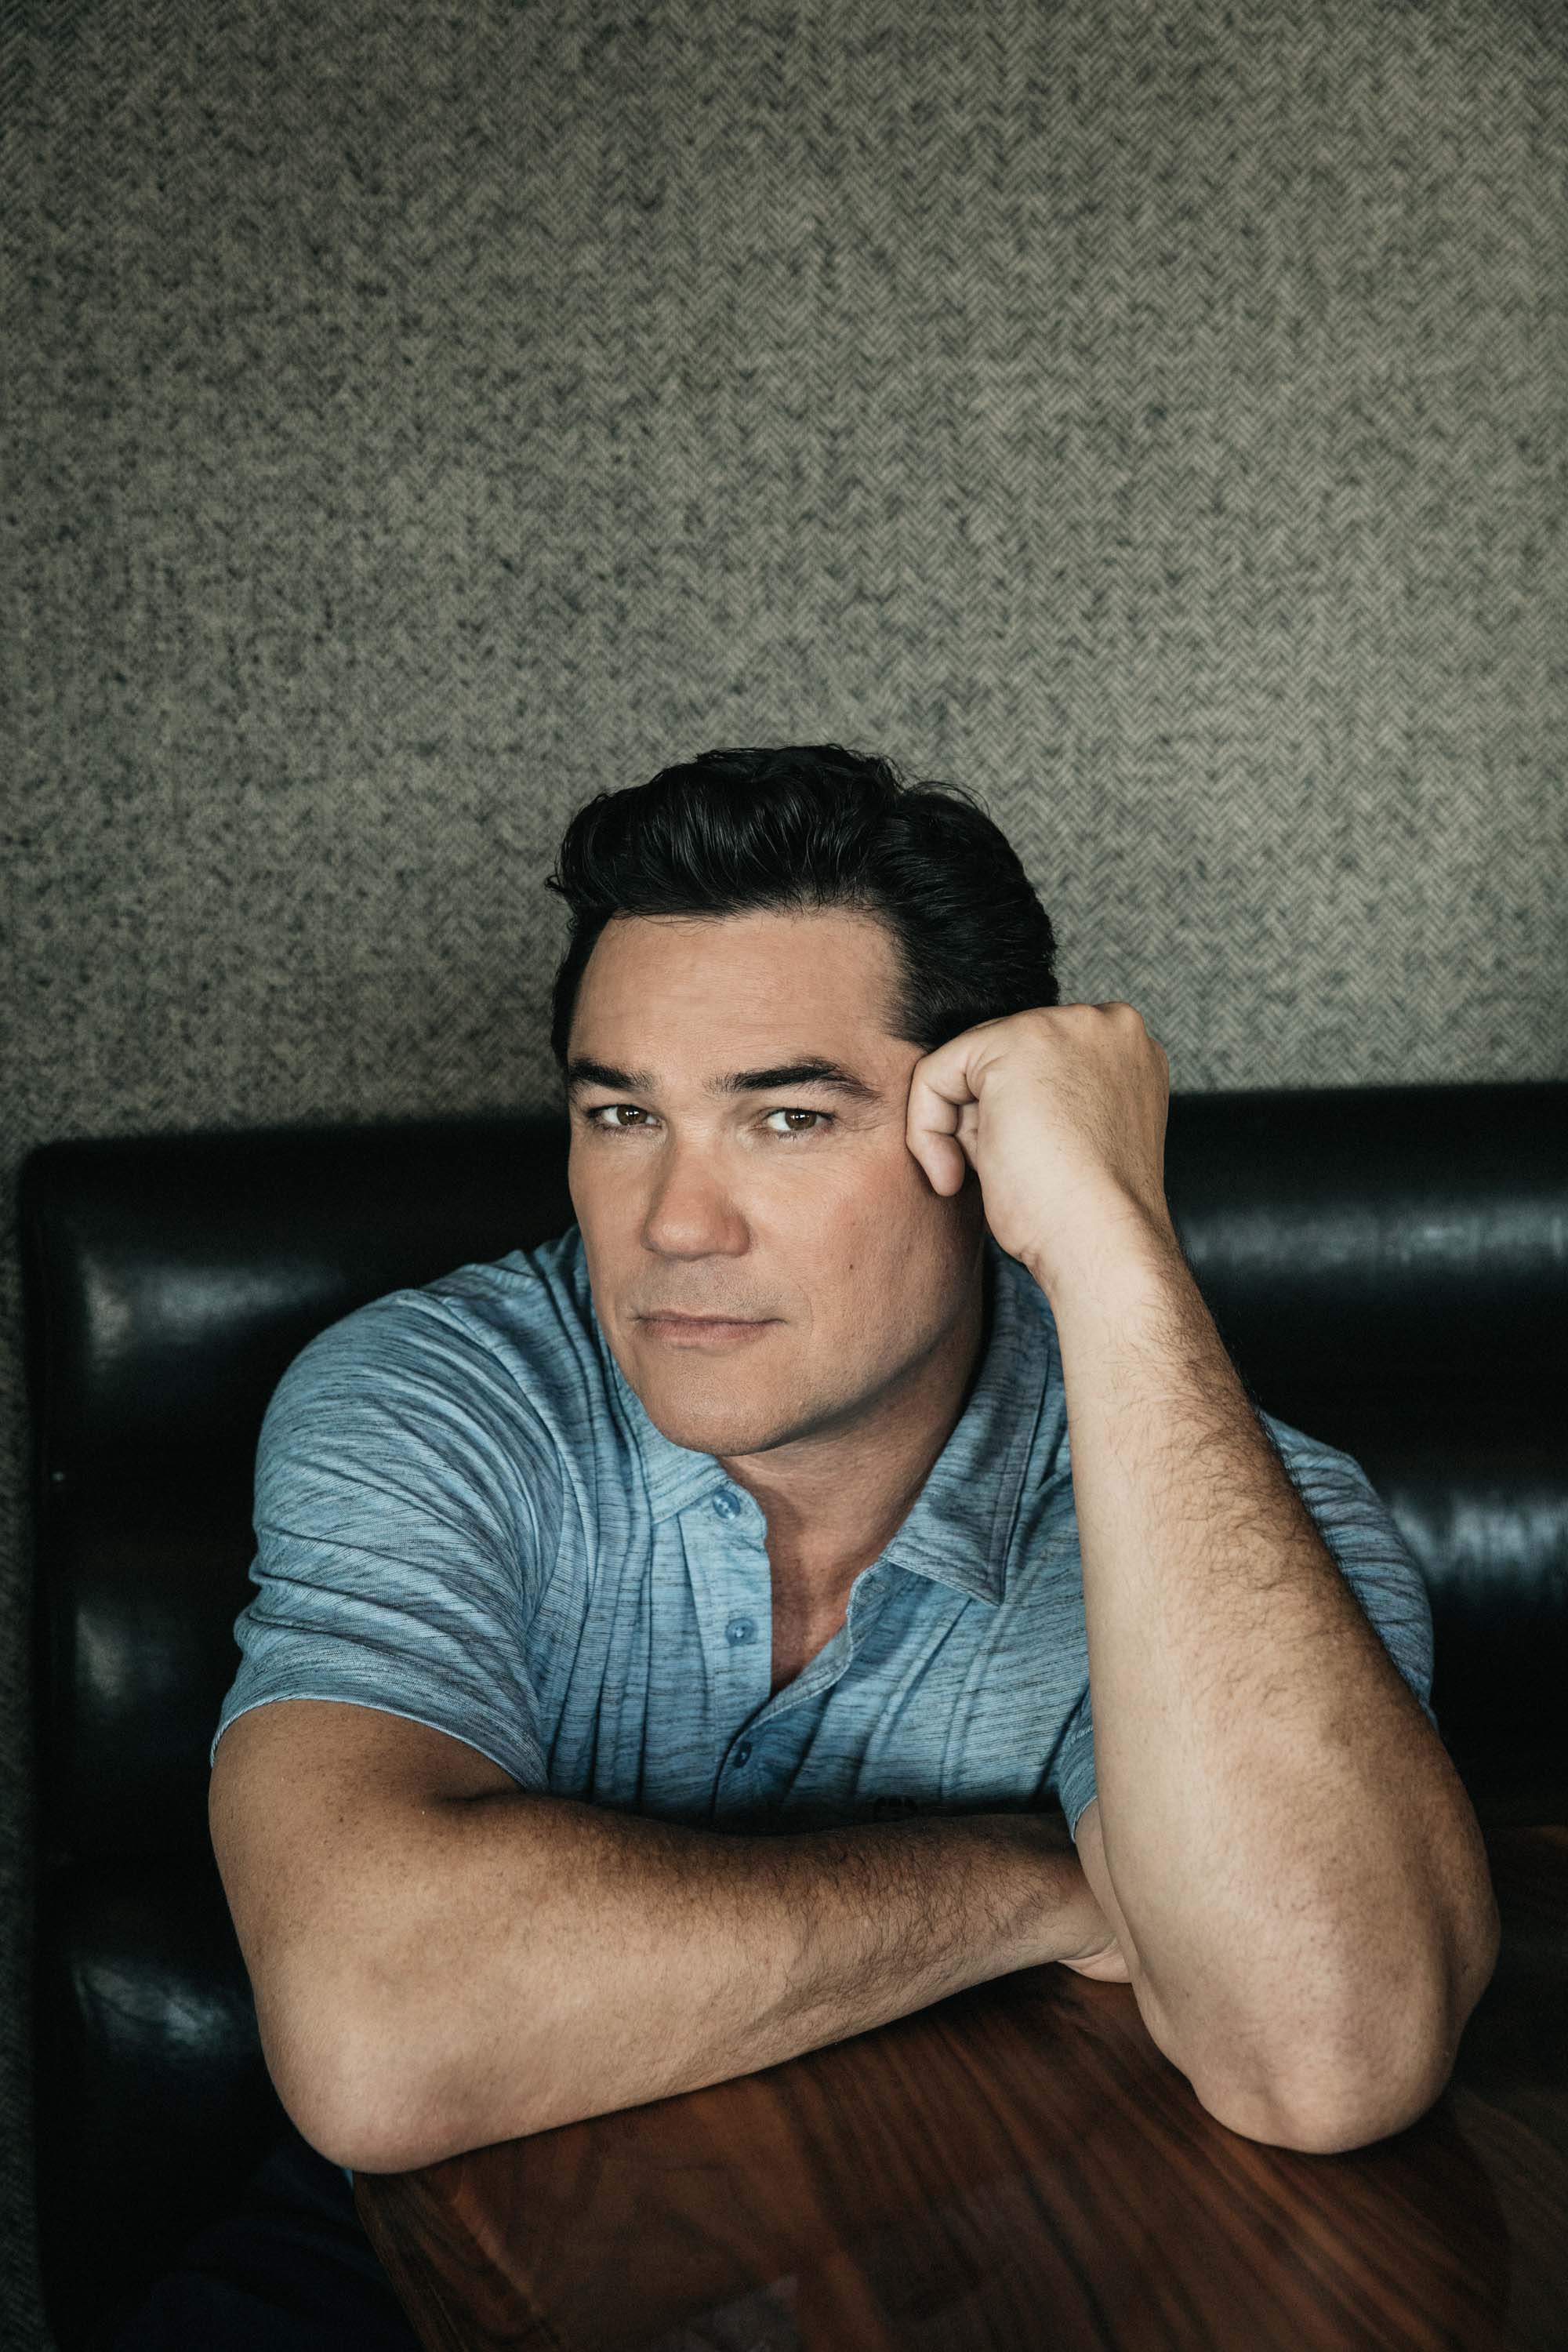 High Point University has announced Dean Cain to serve students as Actor in Residence. Cain is an American actor, producer, television presenter and former football player. 